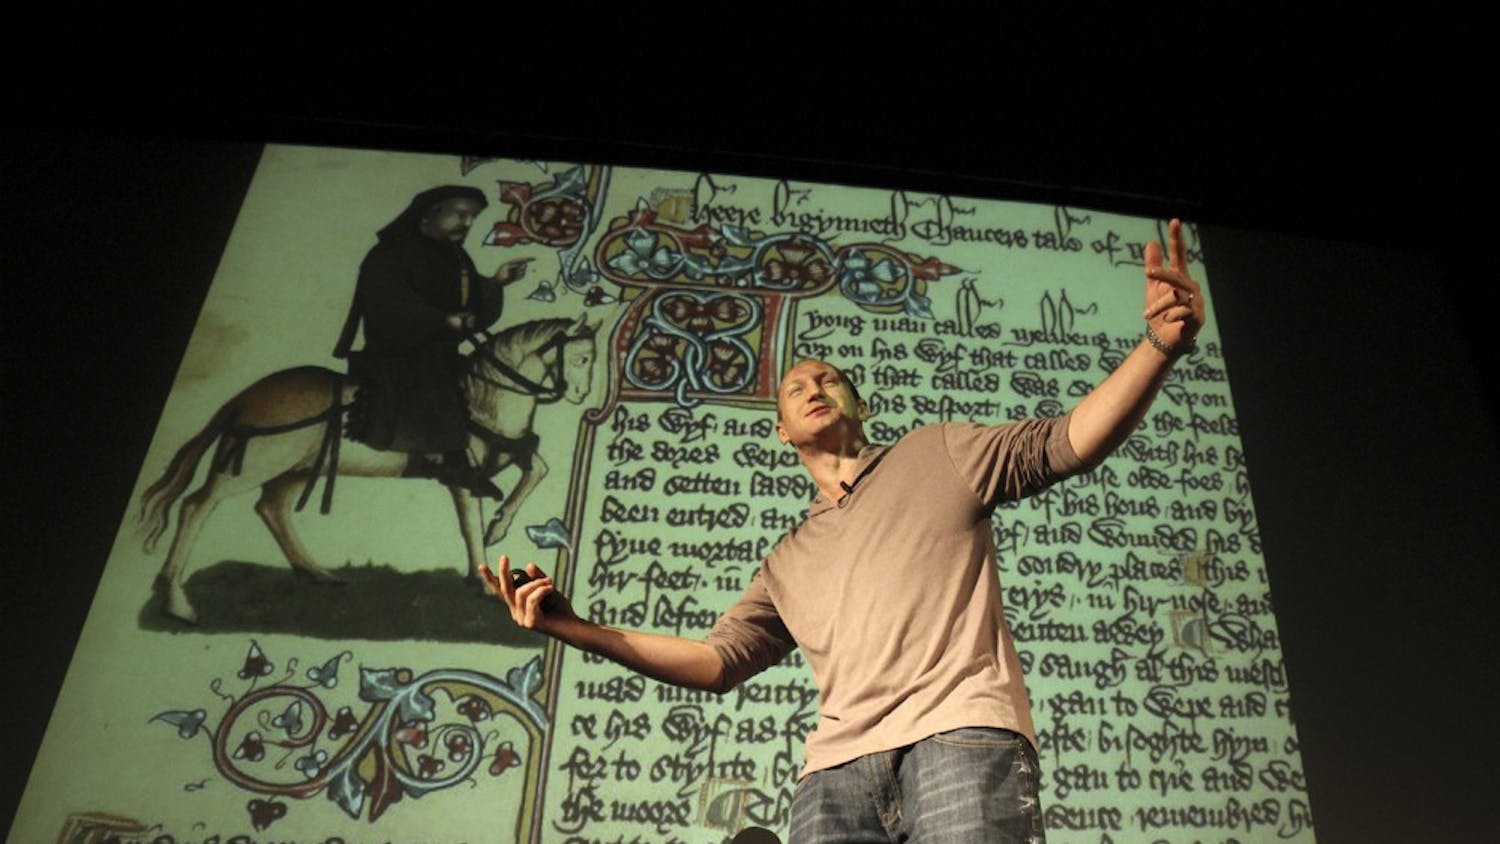 Baba Brinkman re-tells The Canterbury Tales and Beowulf through rapping.